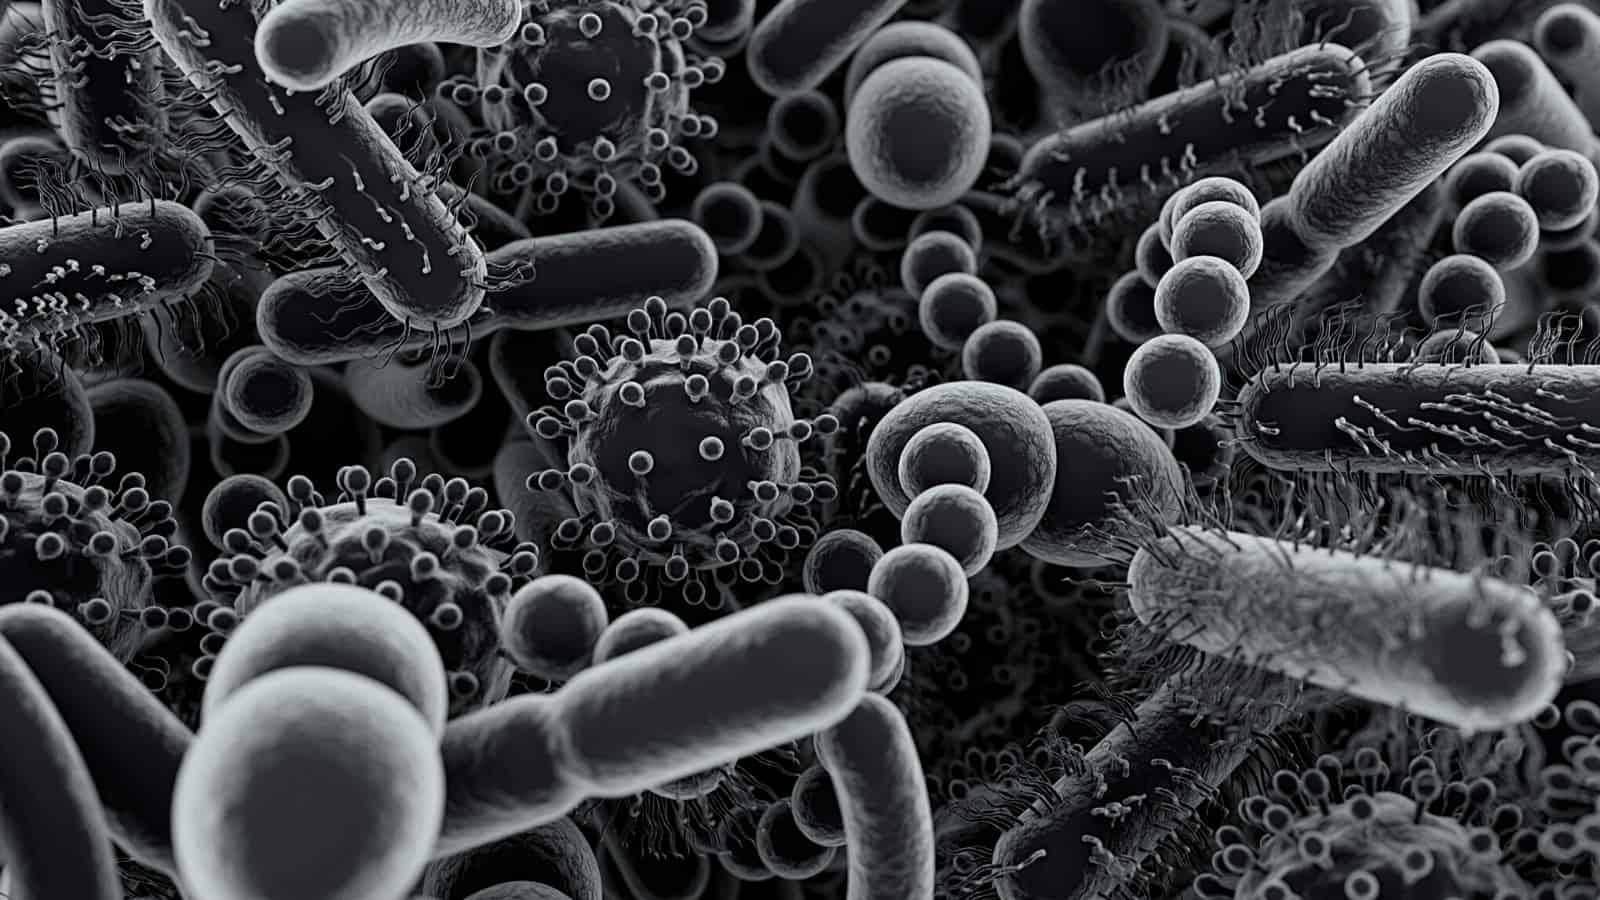 Researchers Link Decreased Gut Microbiome to Everyday Chemicals